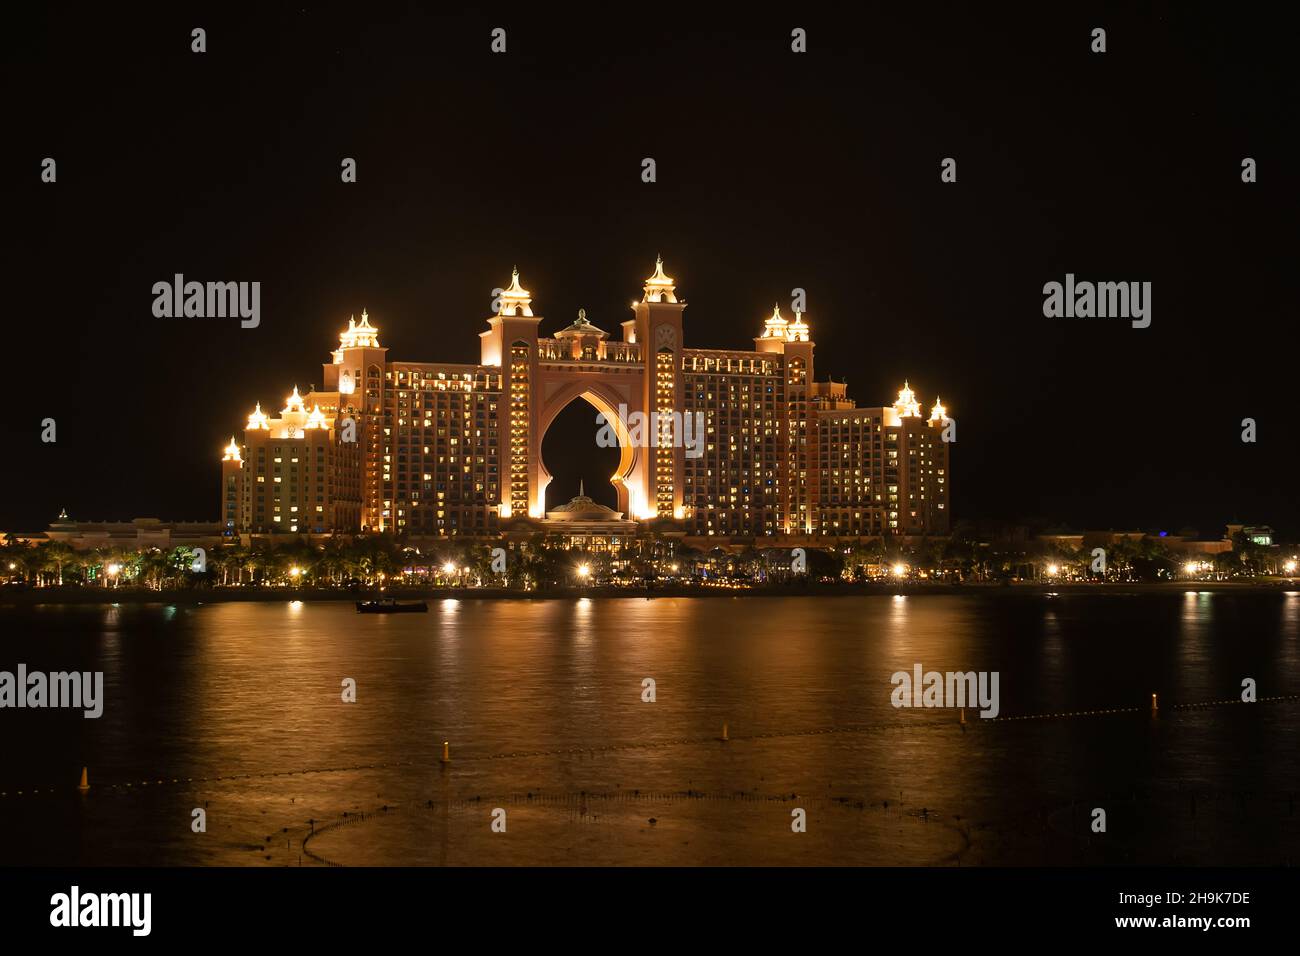 THE POINTE ,DUBAI. VIEW OF THE SPECTACULAR FIREWORKS AND THE COLOURFUL DANCING FOUNTAINS DURING THE DIWALI CELEBRATION AT THE POINTE PALM JUMEIRAH Stock Photo